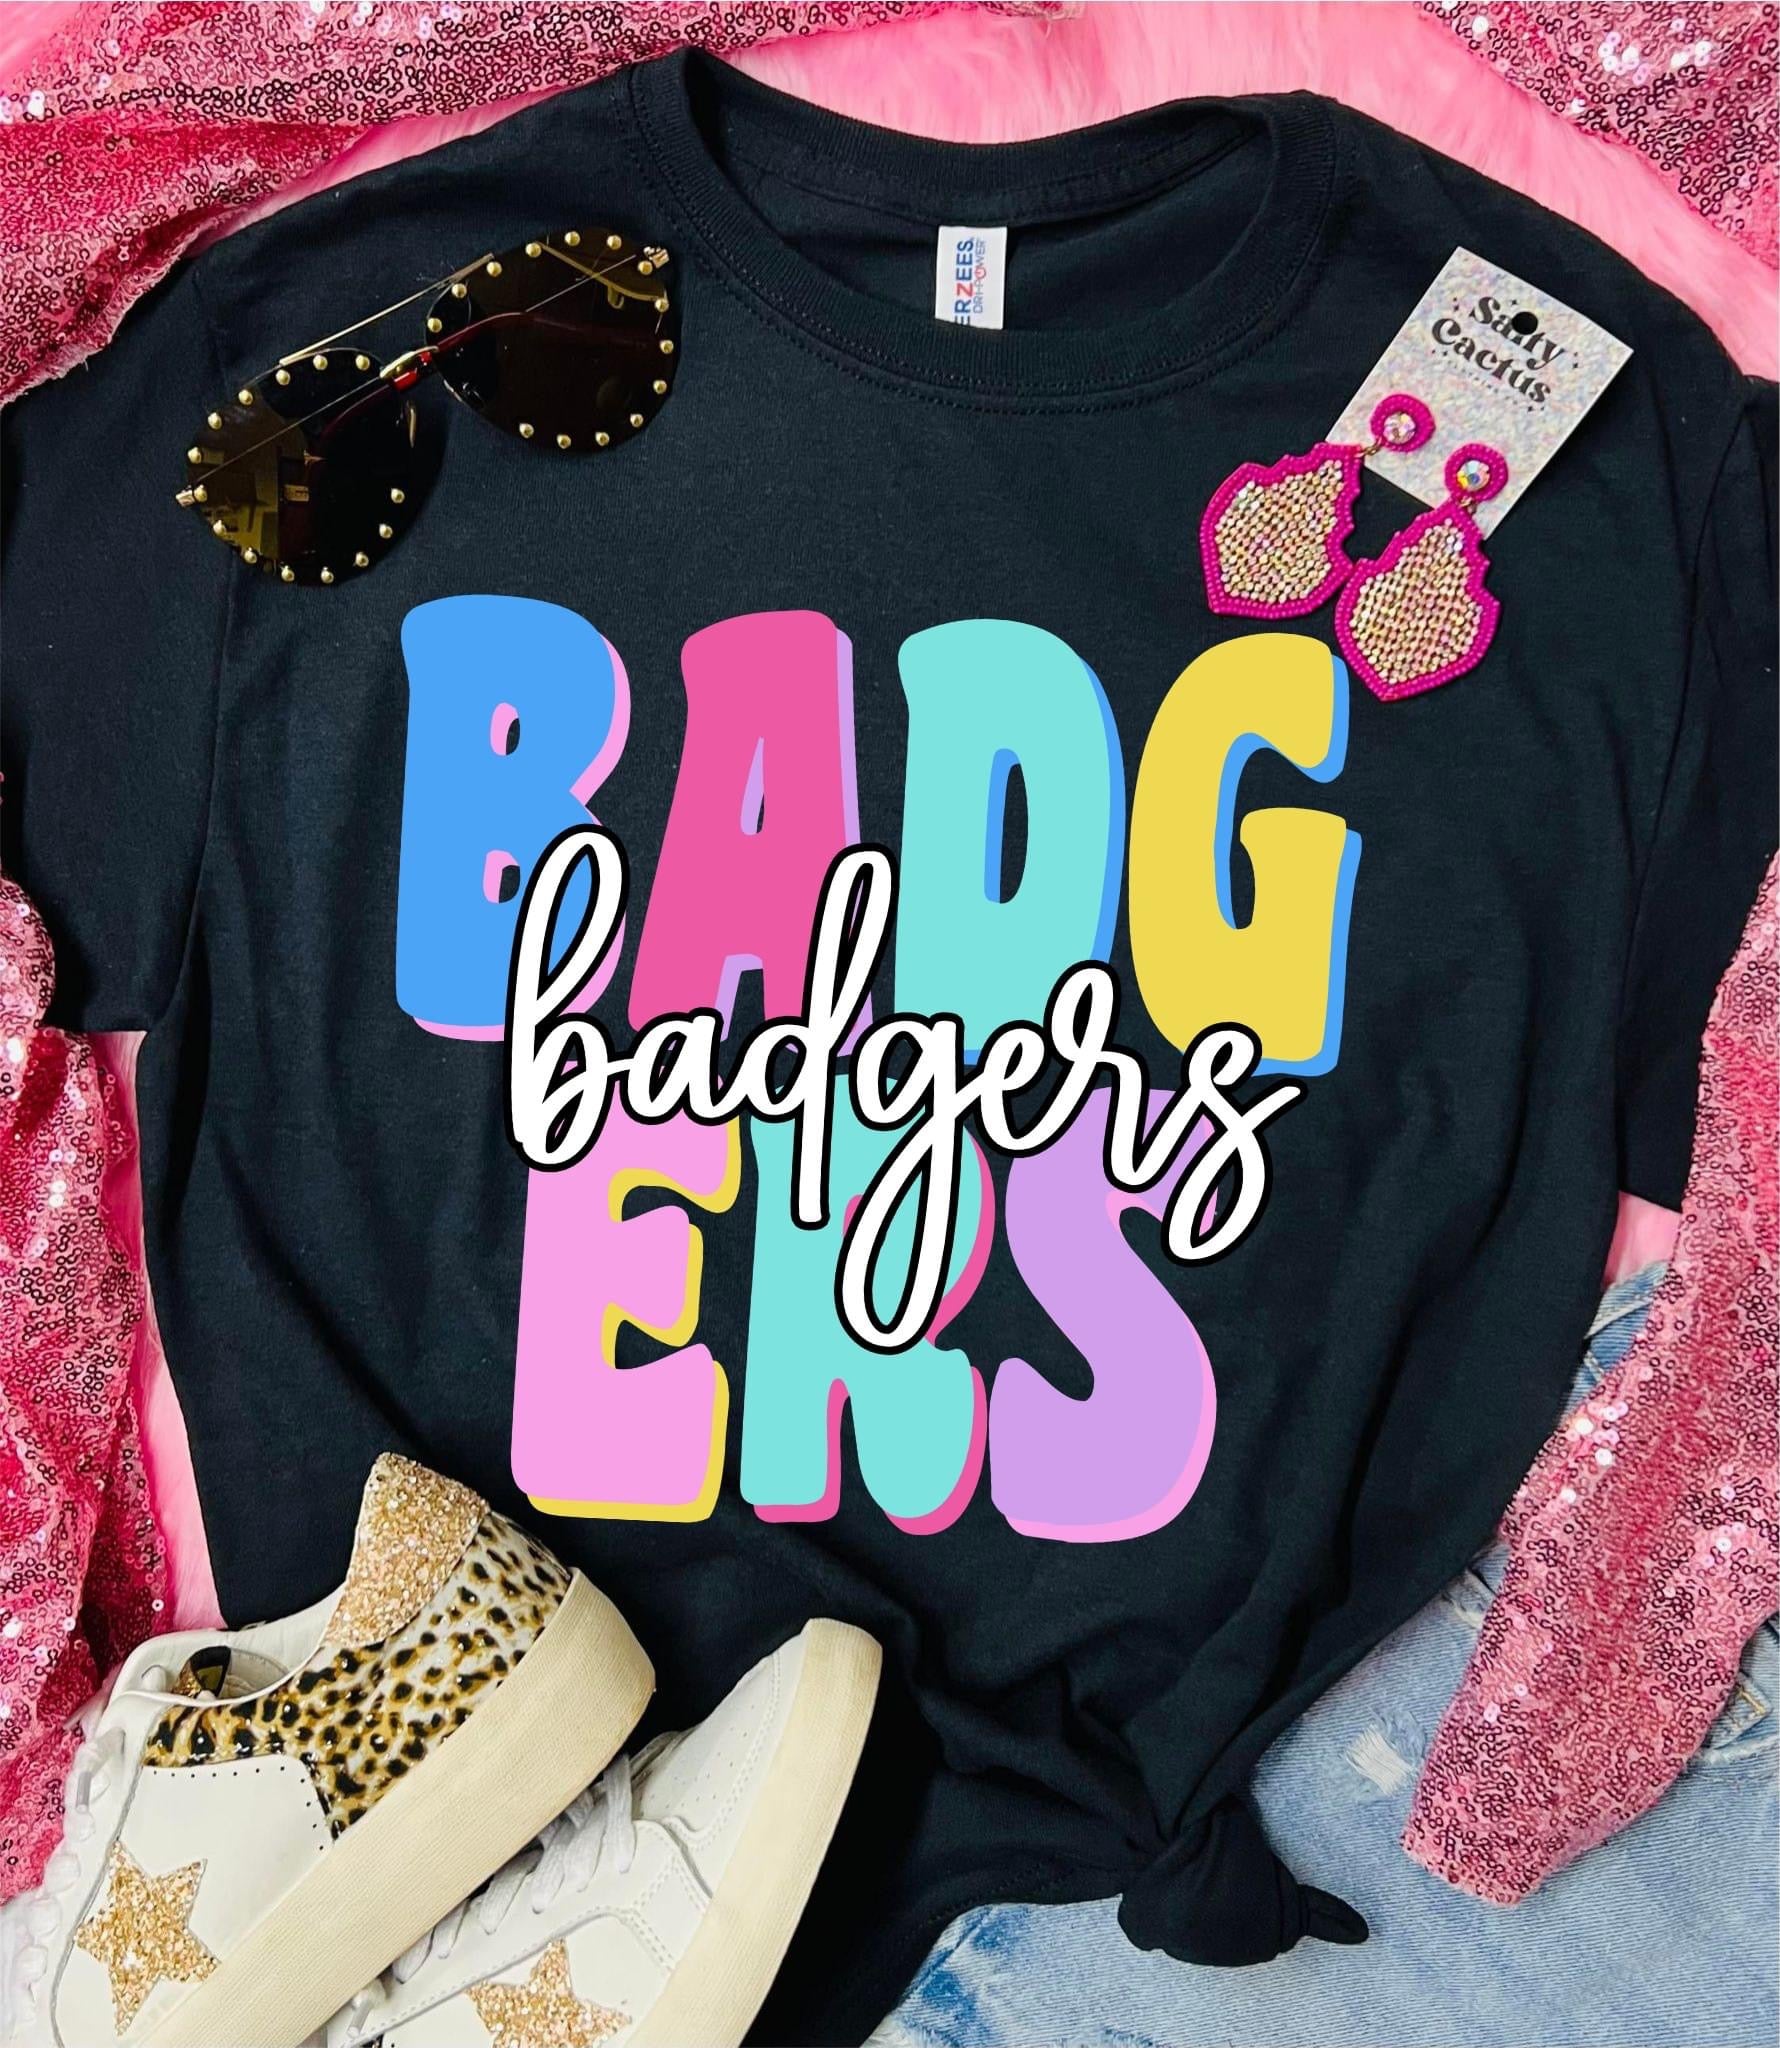 PREORDER BADGERS COLORFUL T-SHIRT